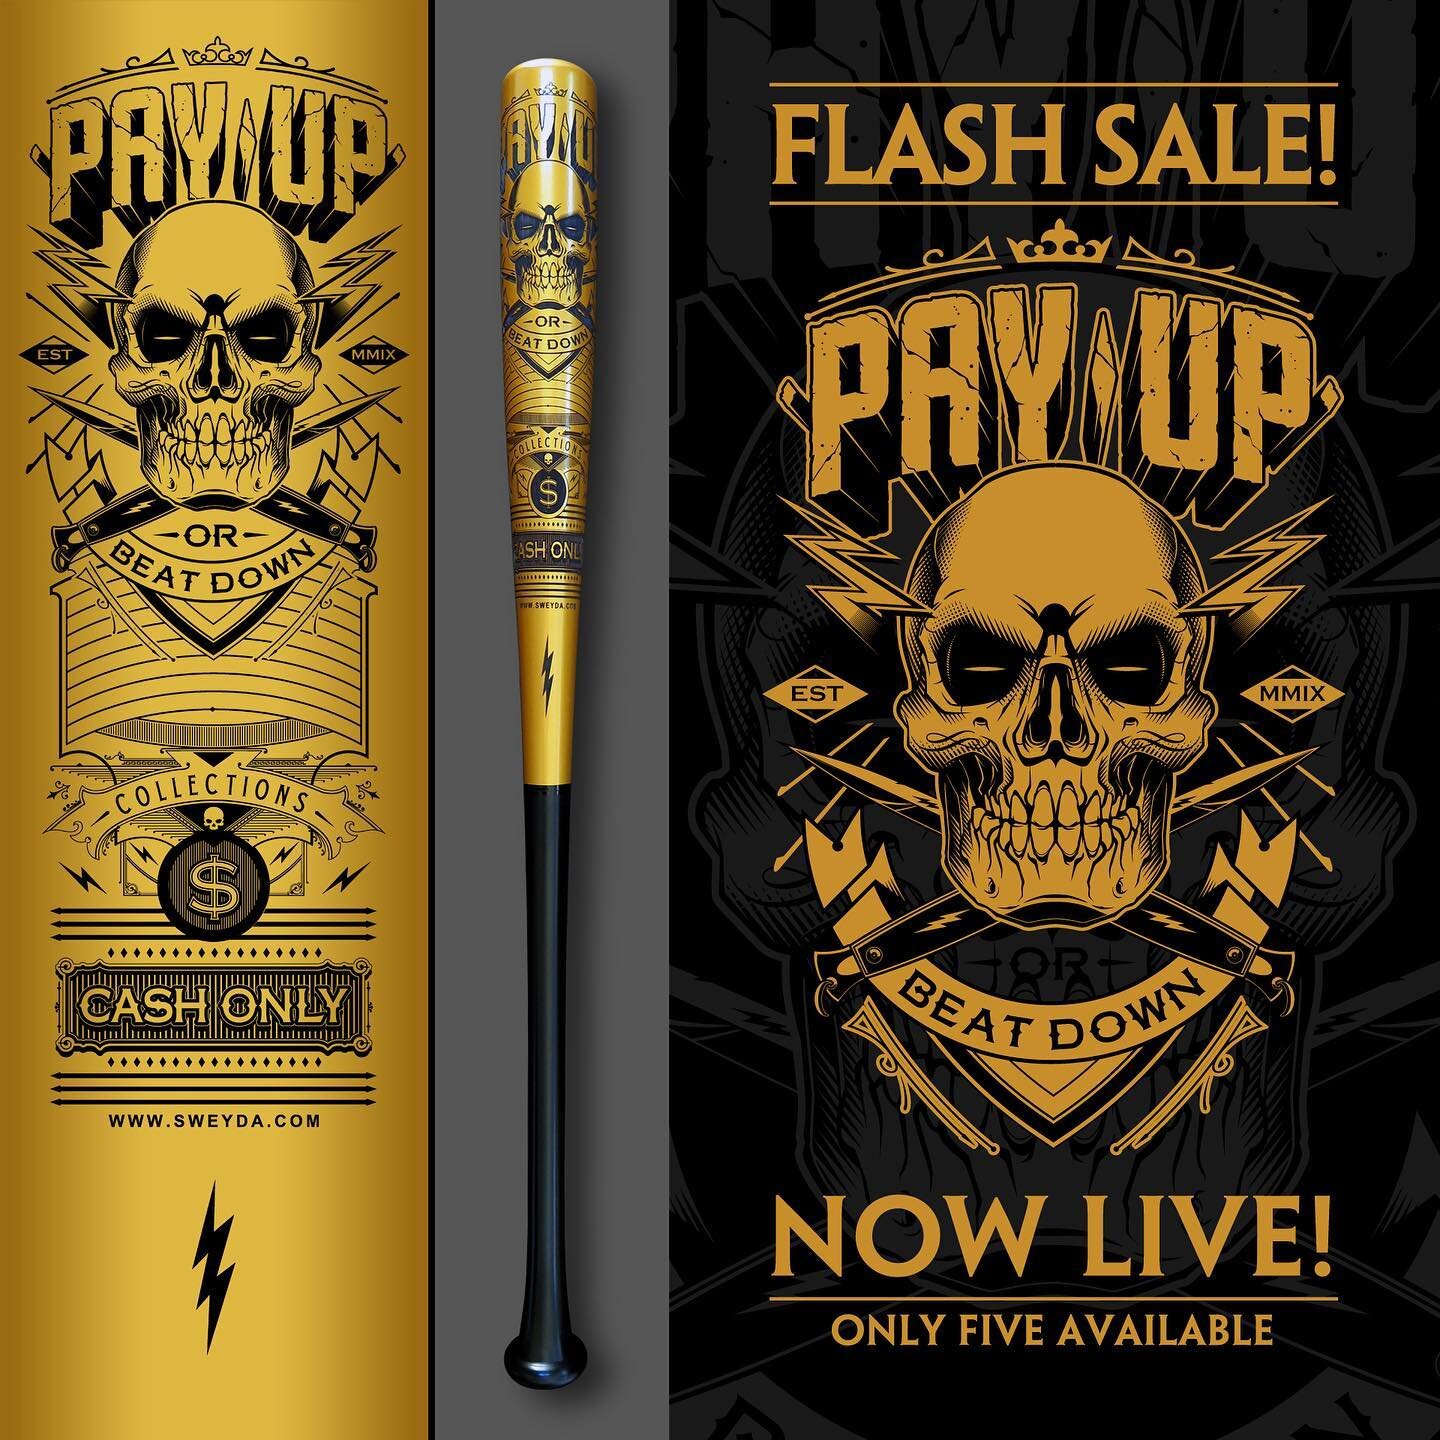 FLASH SALE! Pay up or beat down bats! Just five up for grabs. I know you&rsquo;ve been asking so&hellip;. First come first served!